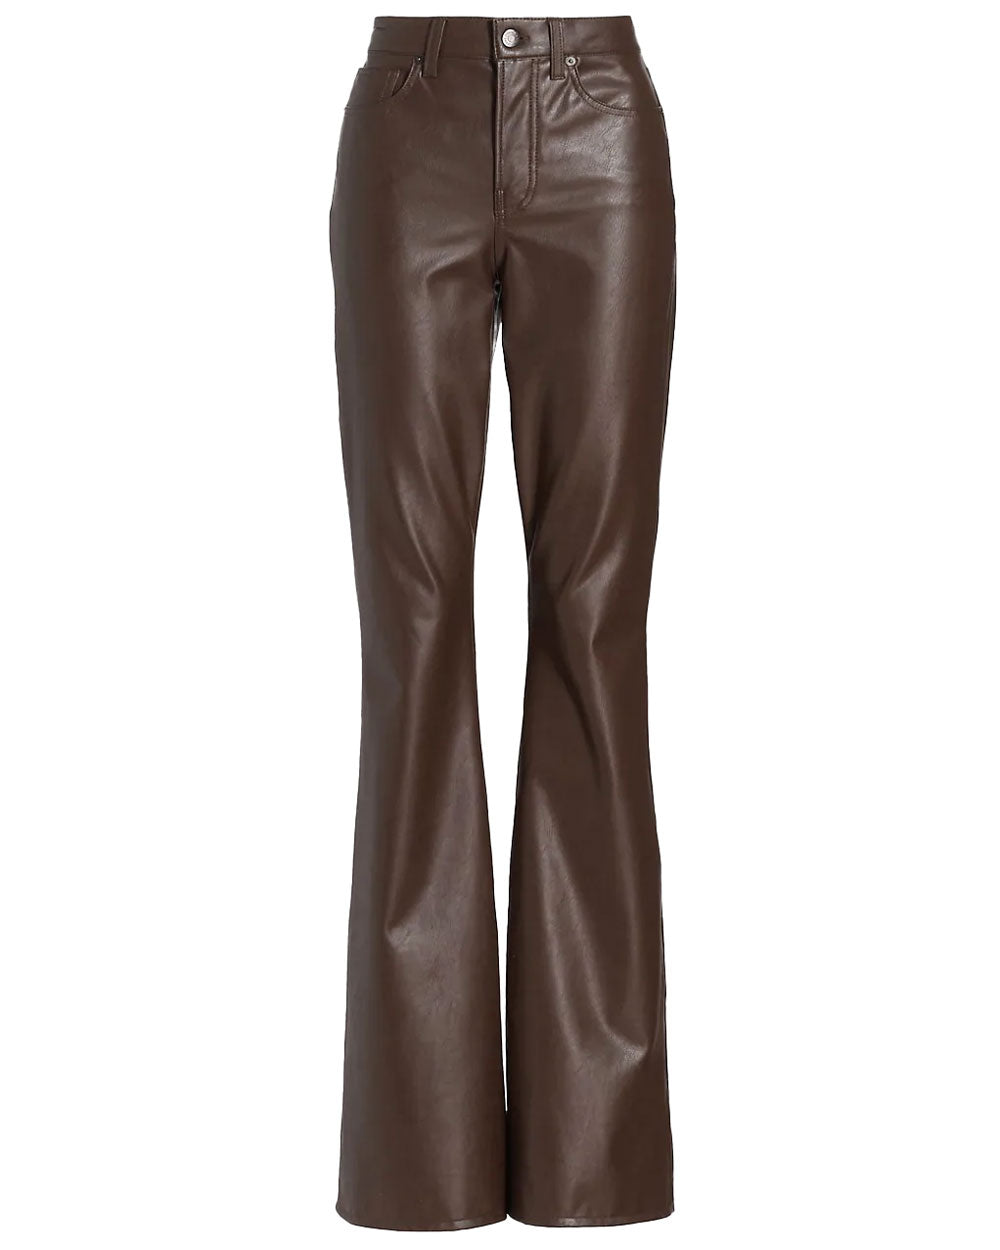 Light Chicory Beverly High Rise Skinny Flare Pant